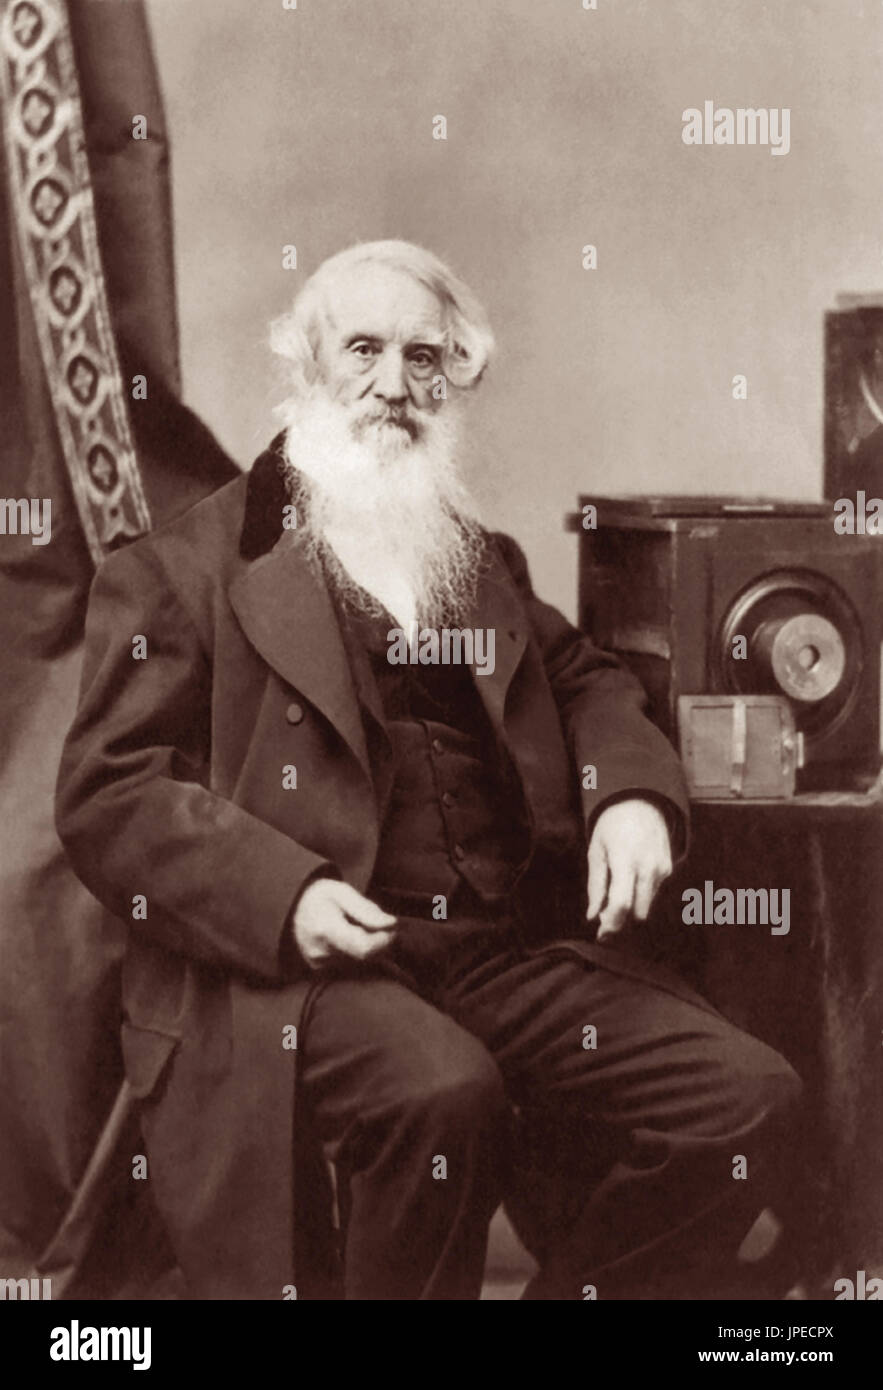 Samuel F.B. Morse (1791-1872), American painter and inventor, shown with a camera and glass plate negatives in an 1872 portrait by photographer Abraham Bogardus. Stock Photo